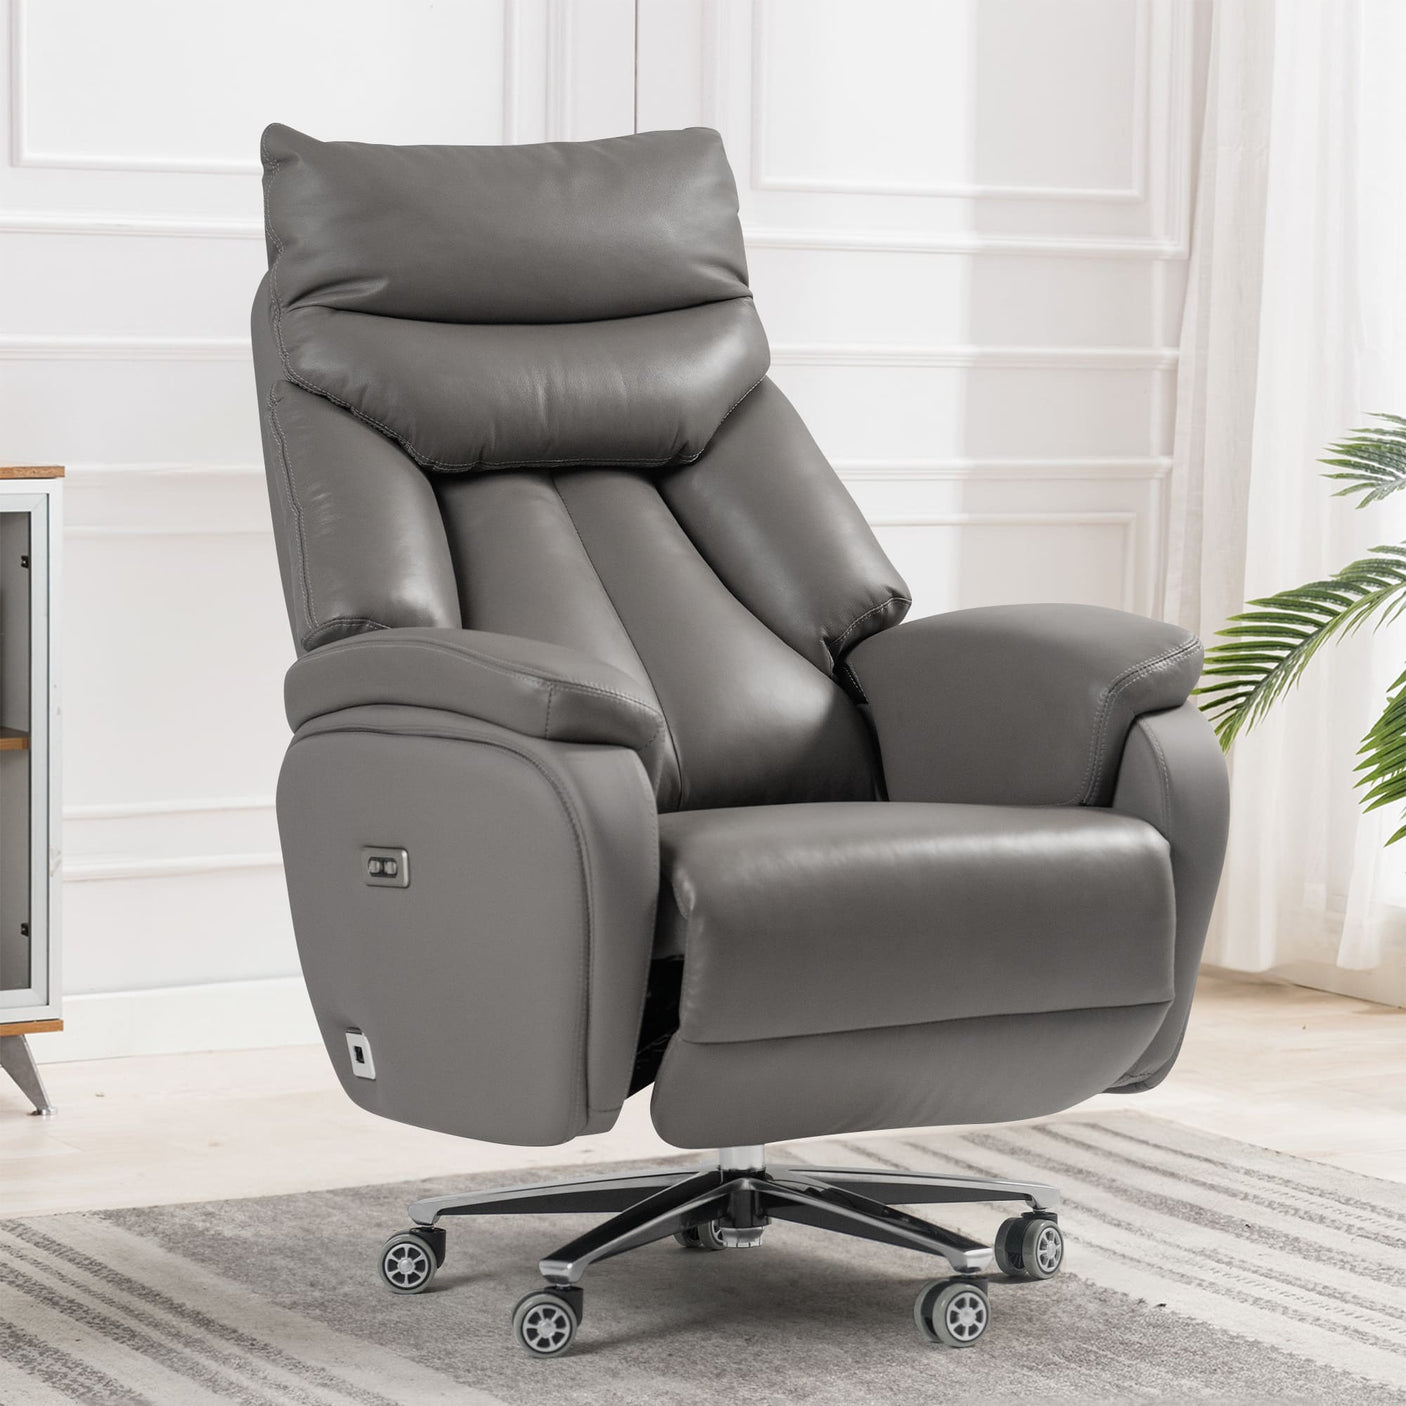 Scene of Coast Power Office Recliner Chair-gray